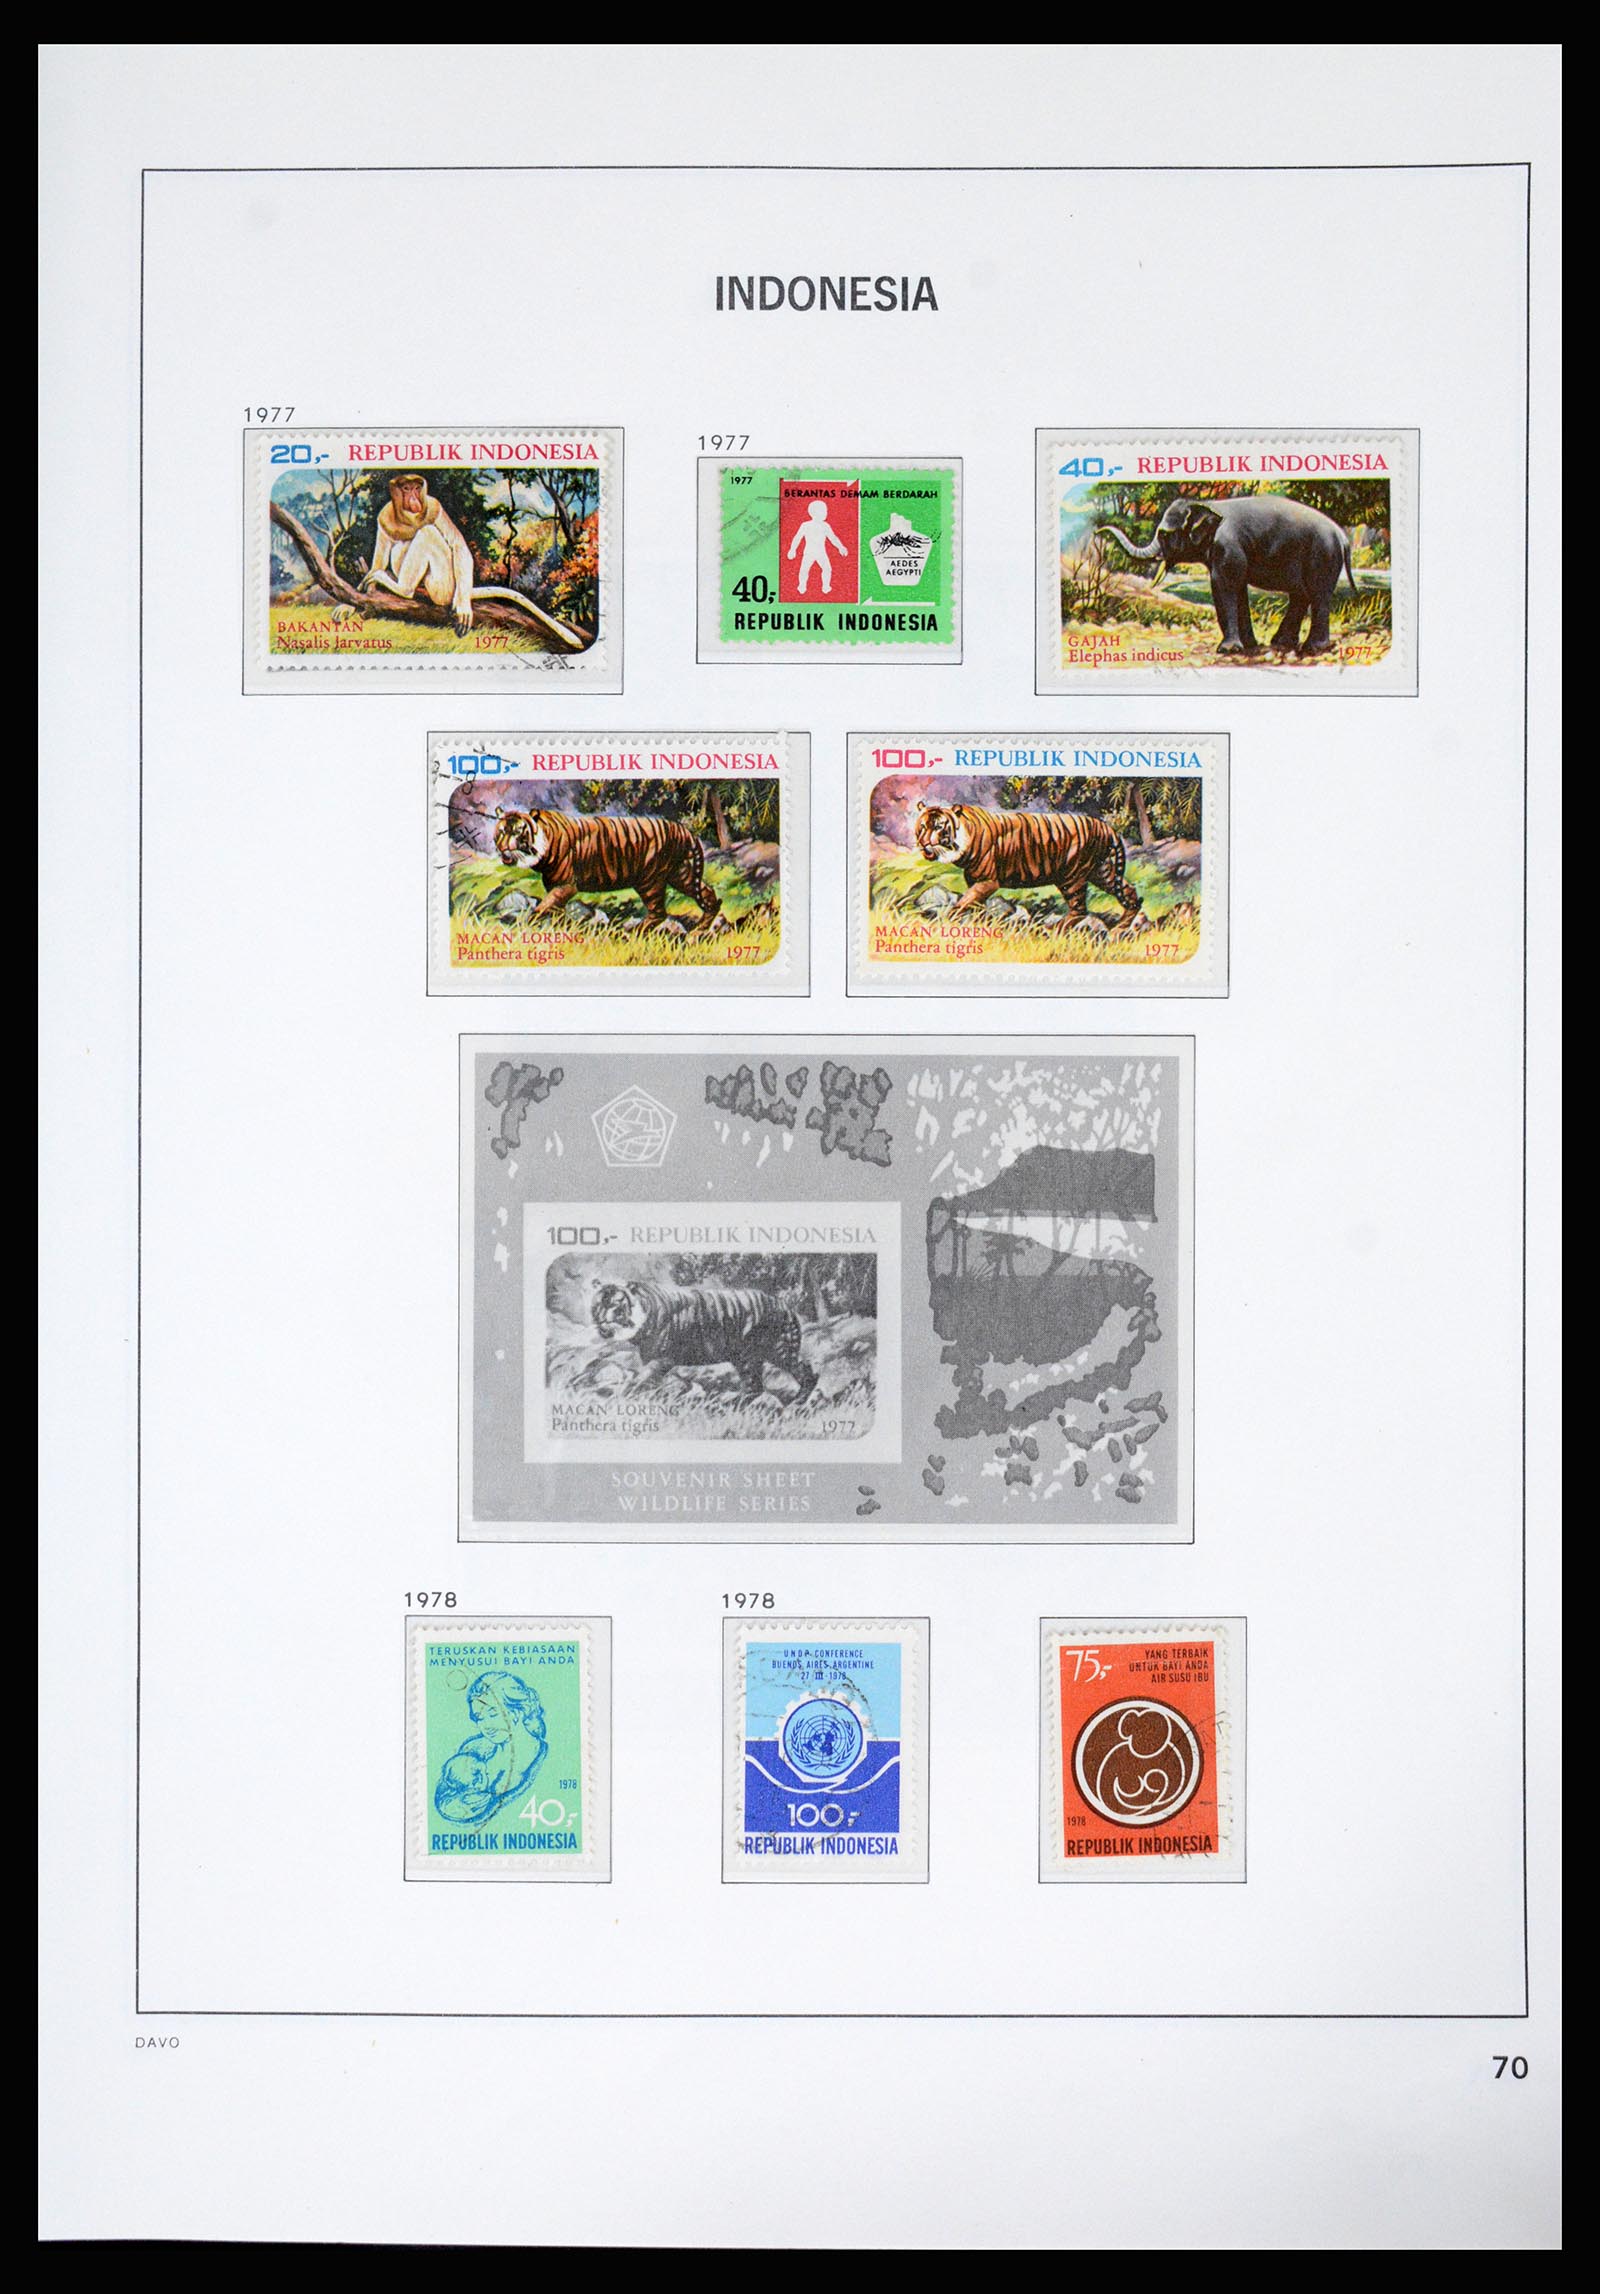 37069 072 - Stamp collection 37069 Indonesia 1948-1980.